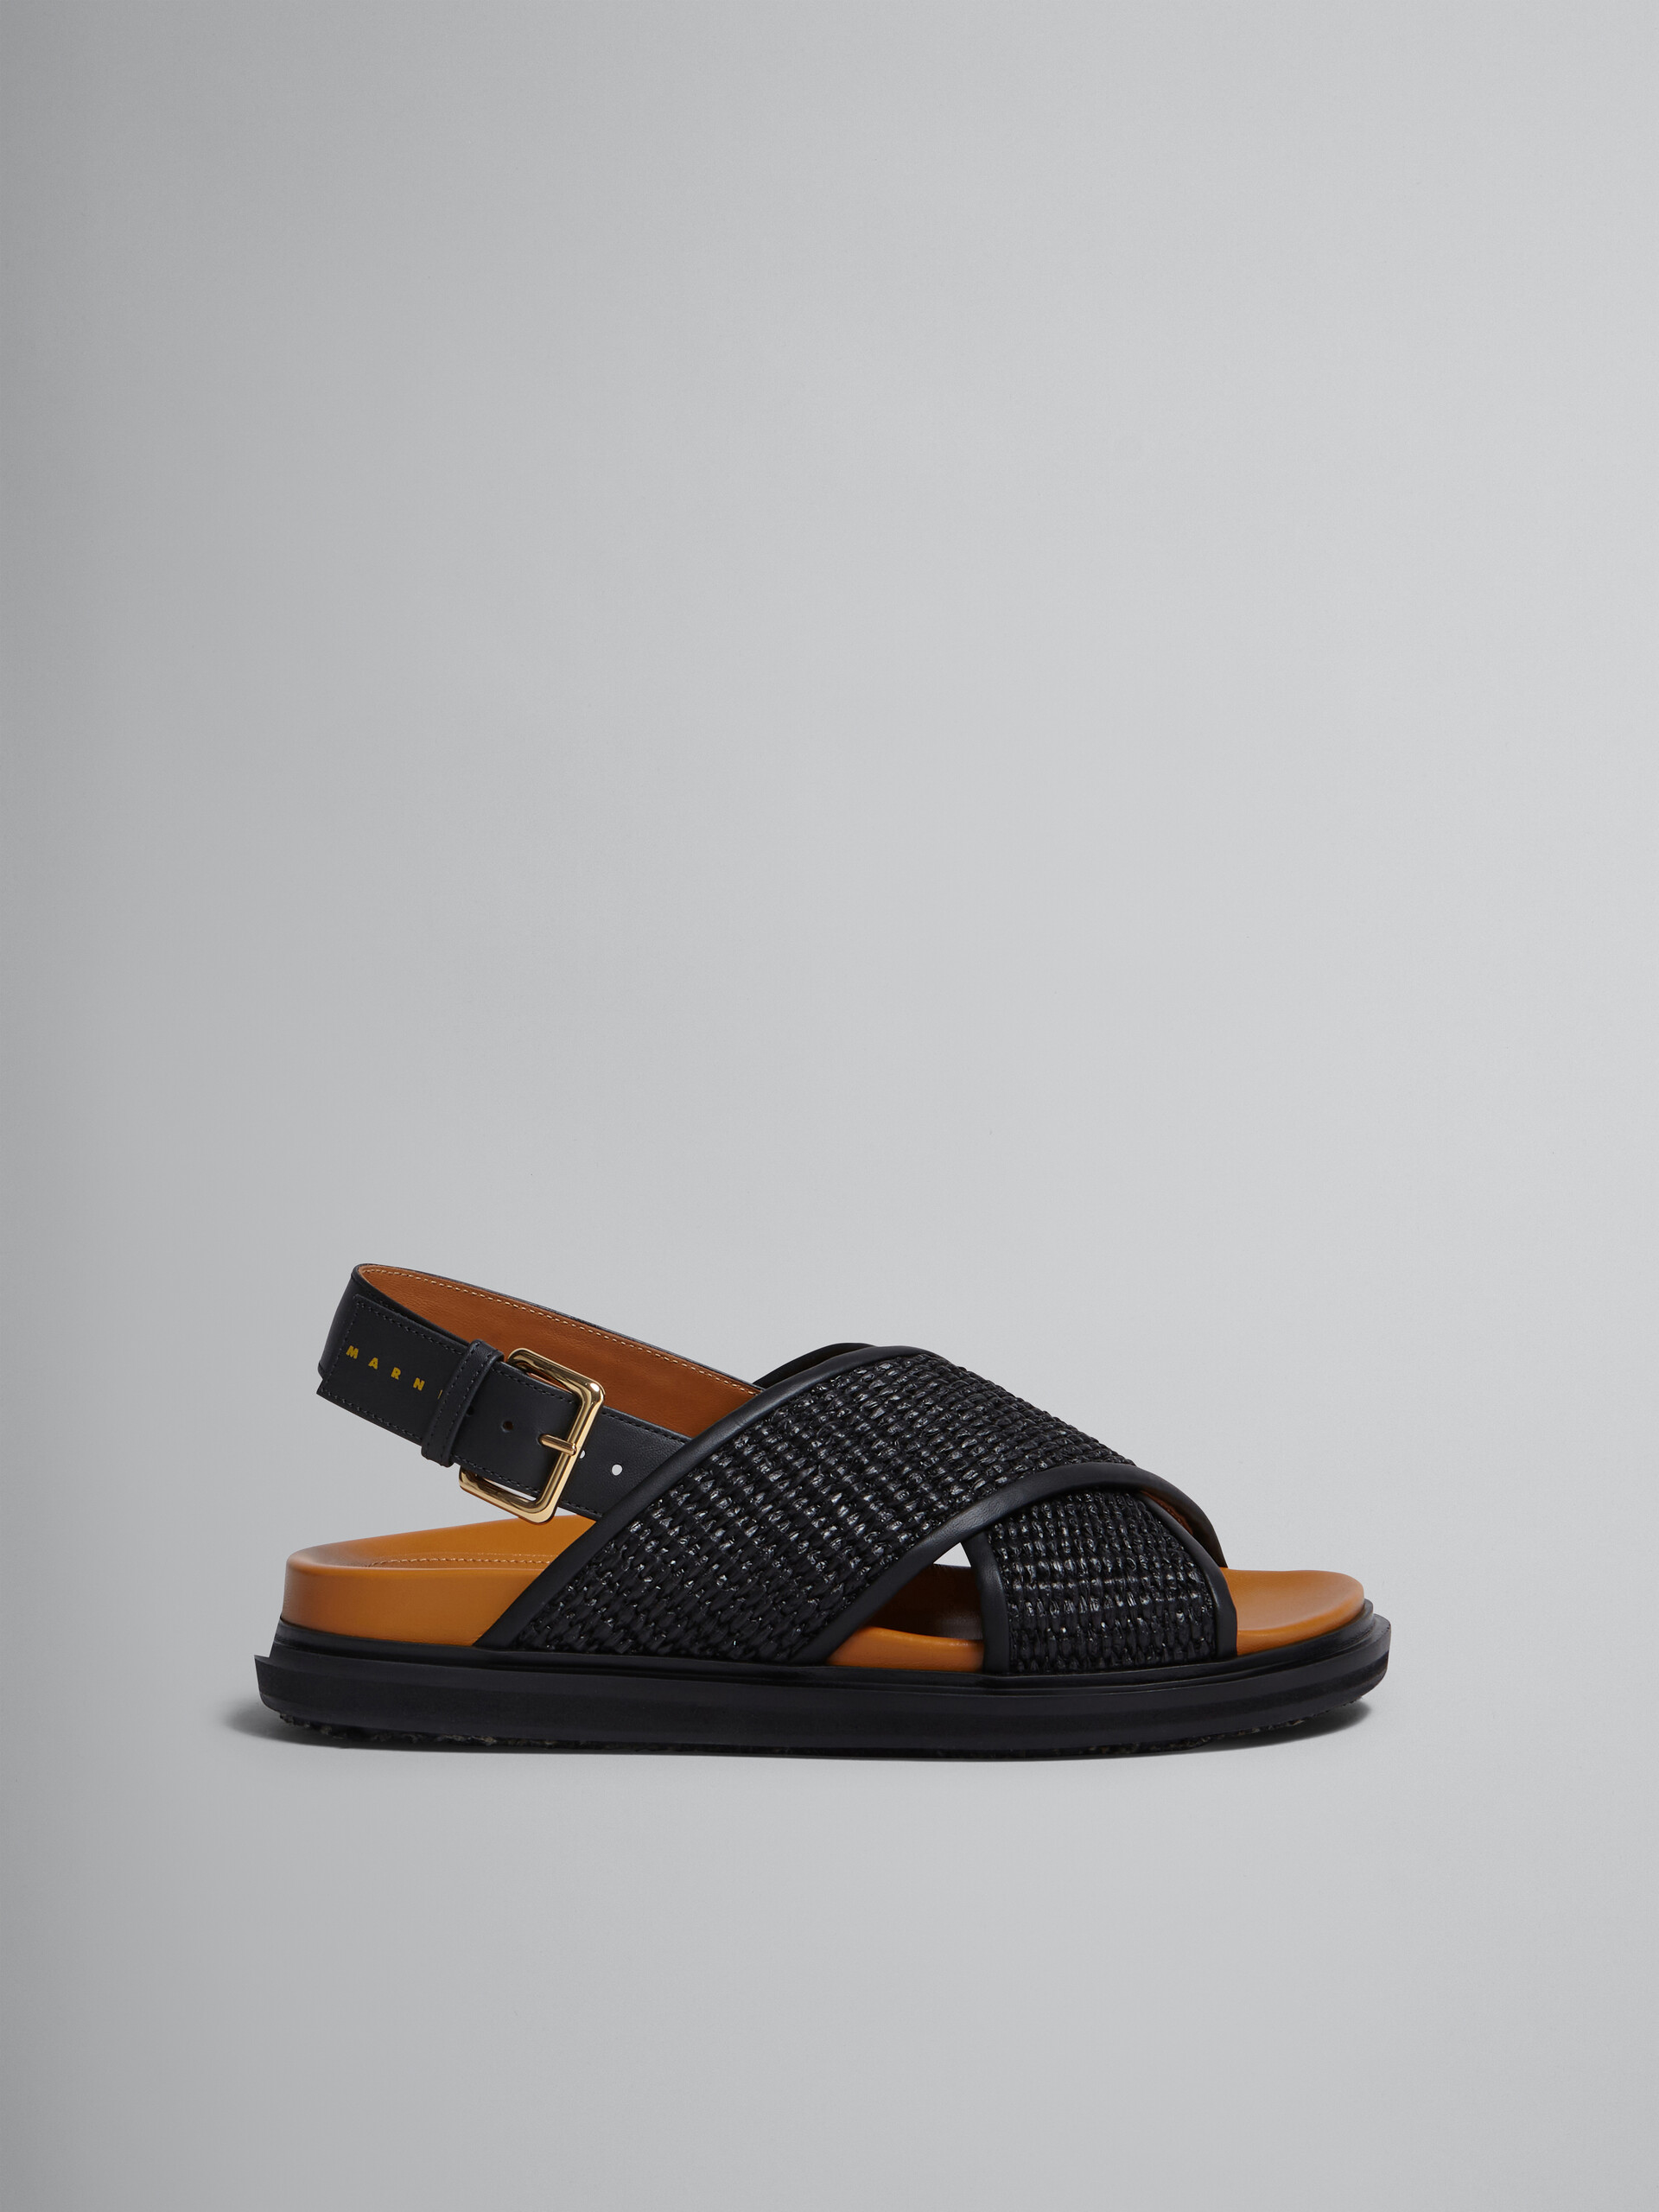 Fussbet sandals in brown leather and raffia-effect fabric - Sandals - Image 1